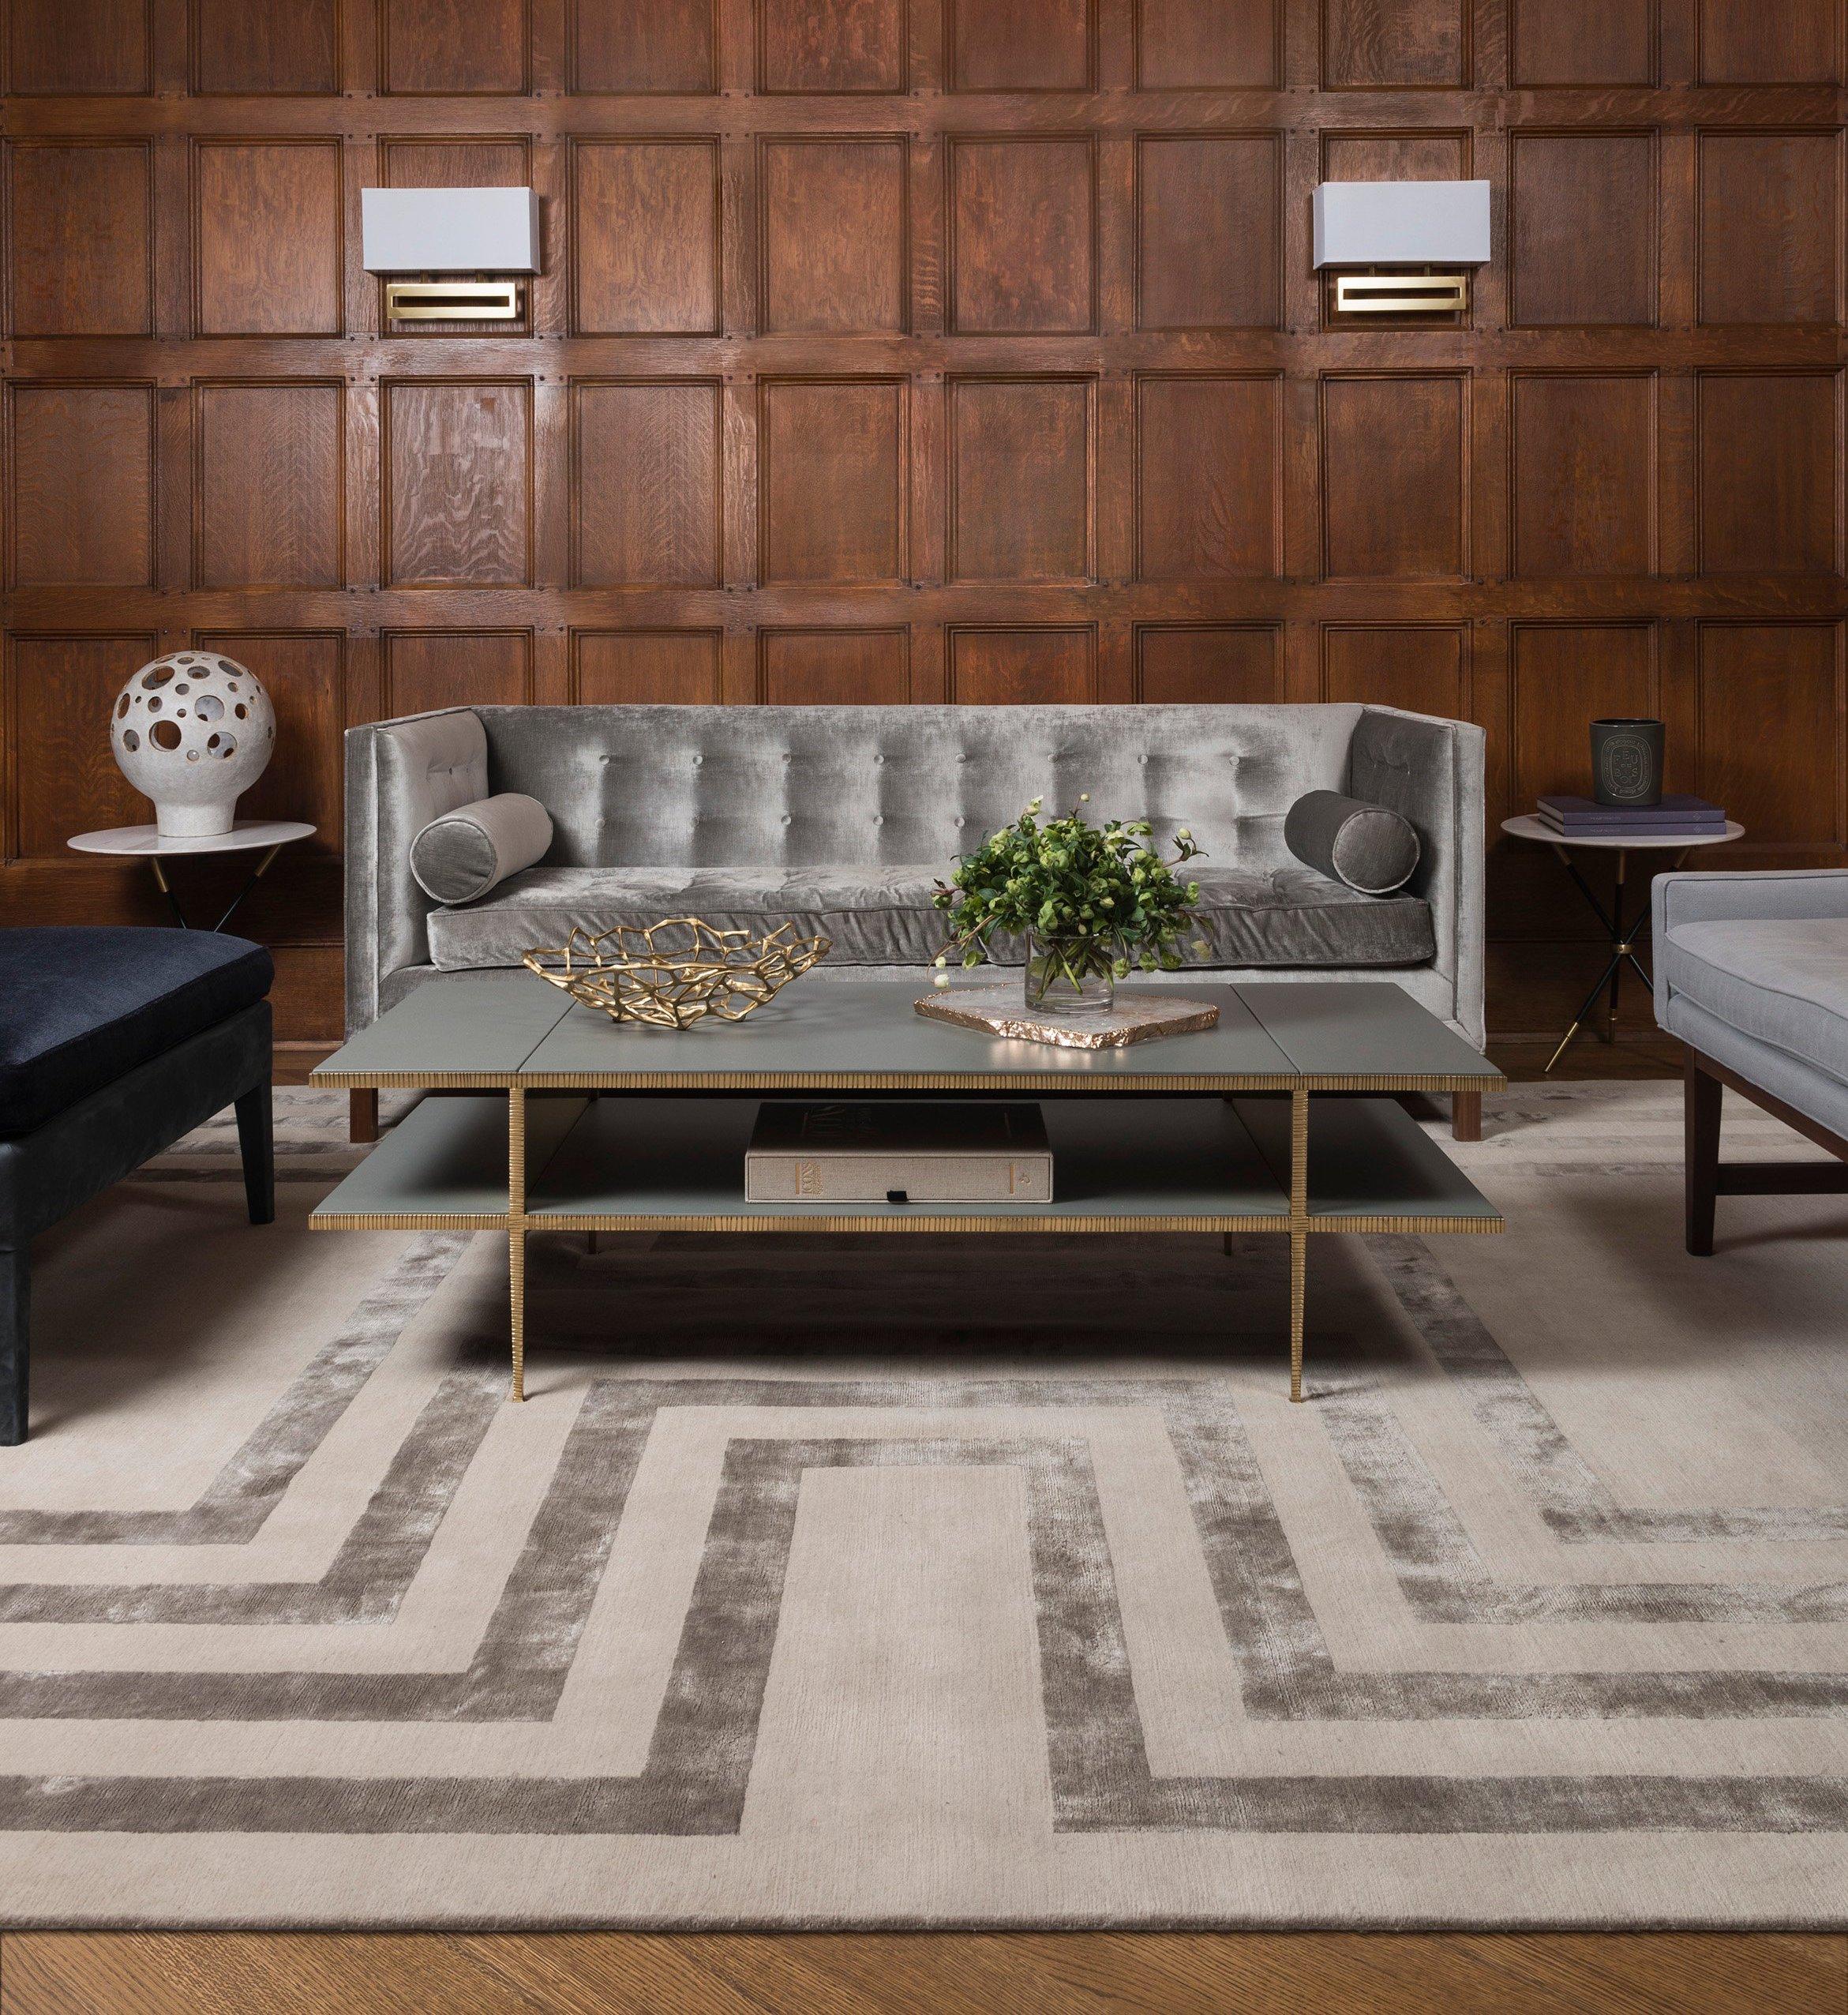 Inspired by the Imperial architecture of the striking 1930s Monument of Marcello Piacentini in Italy, the Empire rug, also available as a runner, reflects the harmonious proportions and balance typified by the era. Tim Gosling says: “The strength